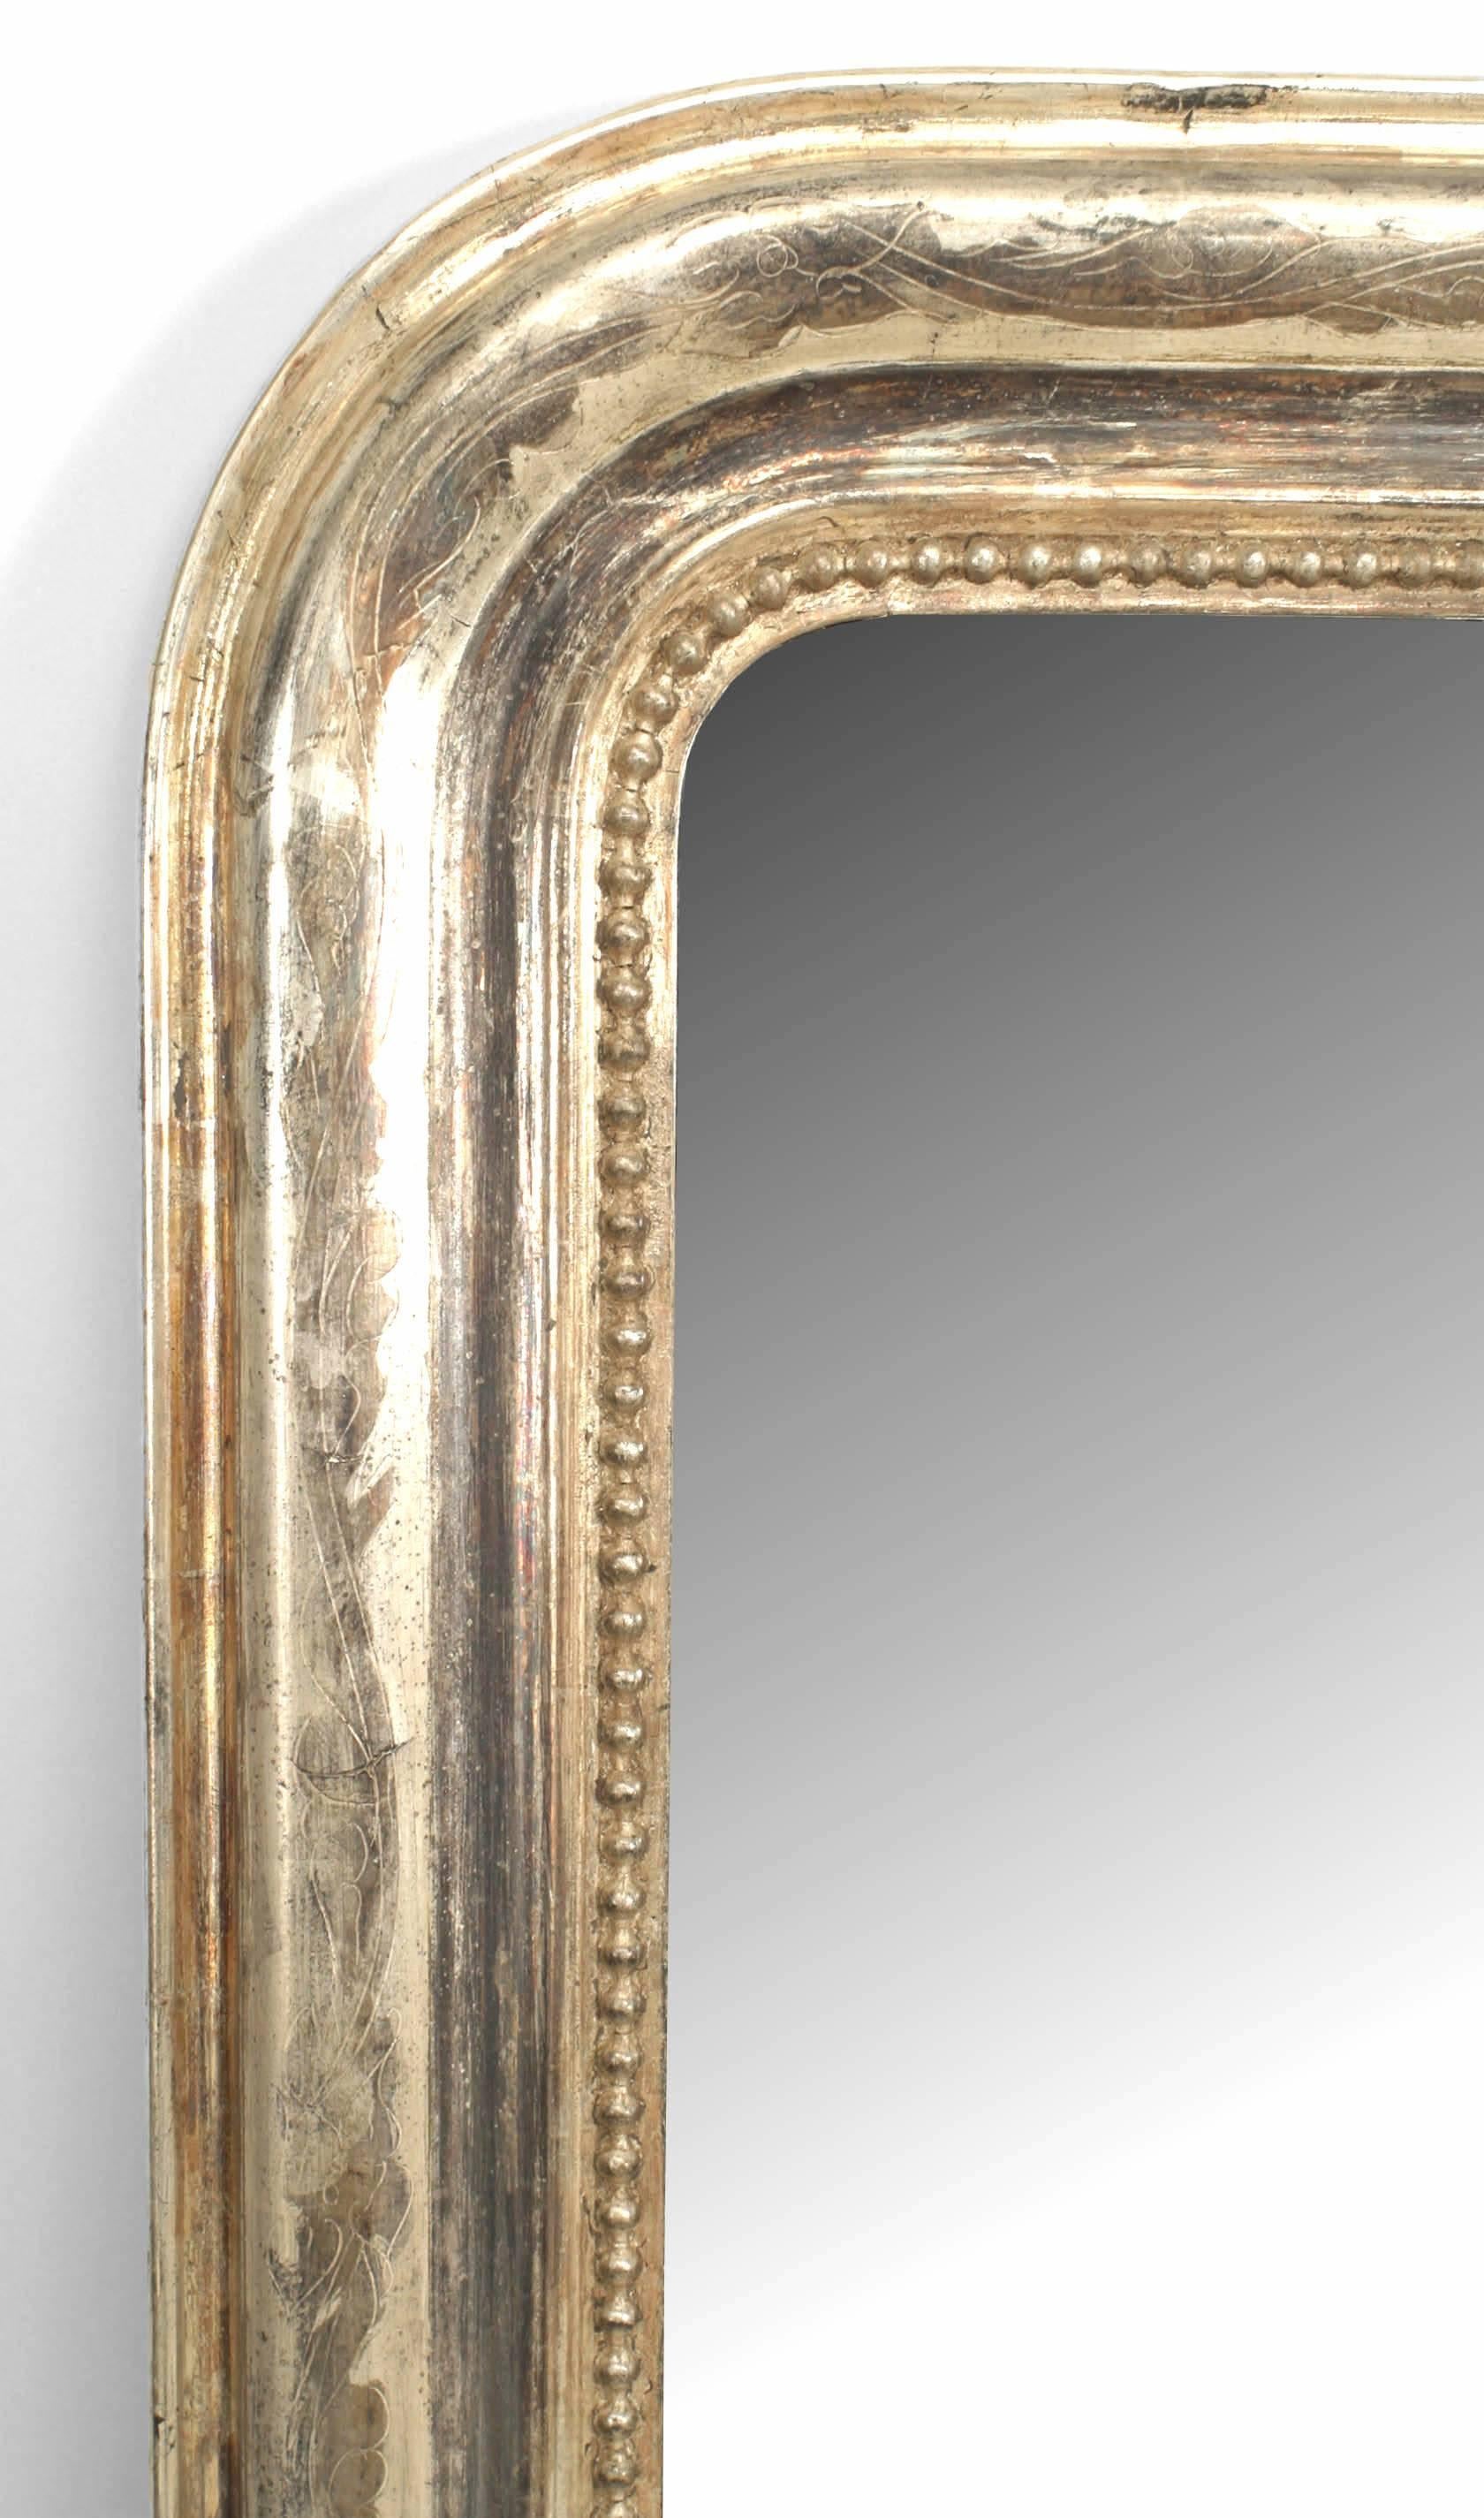 French Victorian style (19th-20th century) silver gilt framed mirror with rounded top sides and burnished silver floral design with beaded trim around mirror.
   